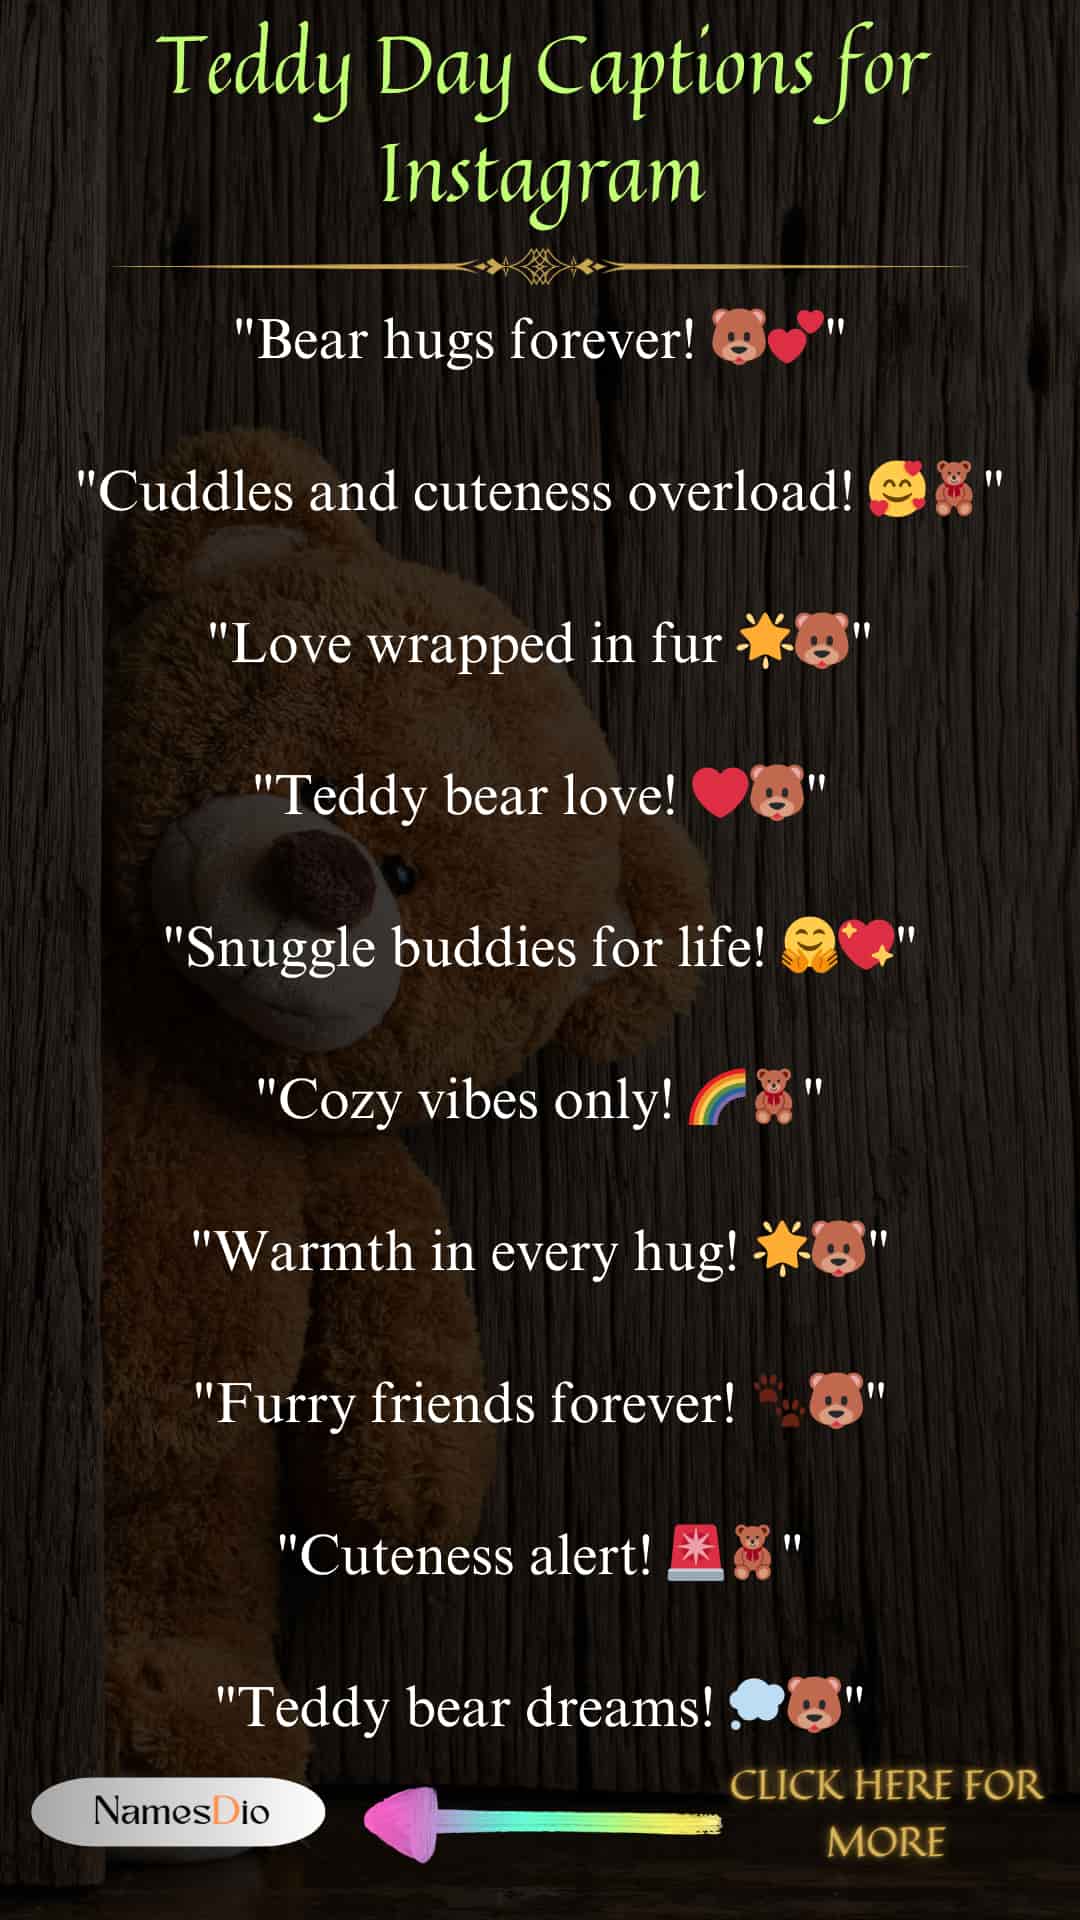 Teddy-Day-Captions-for-Instagram